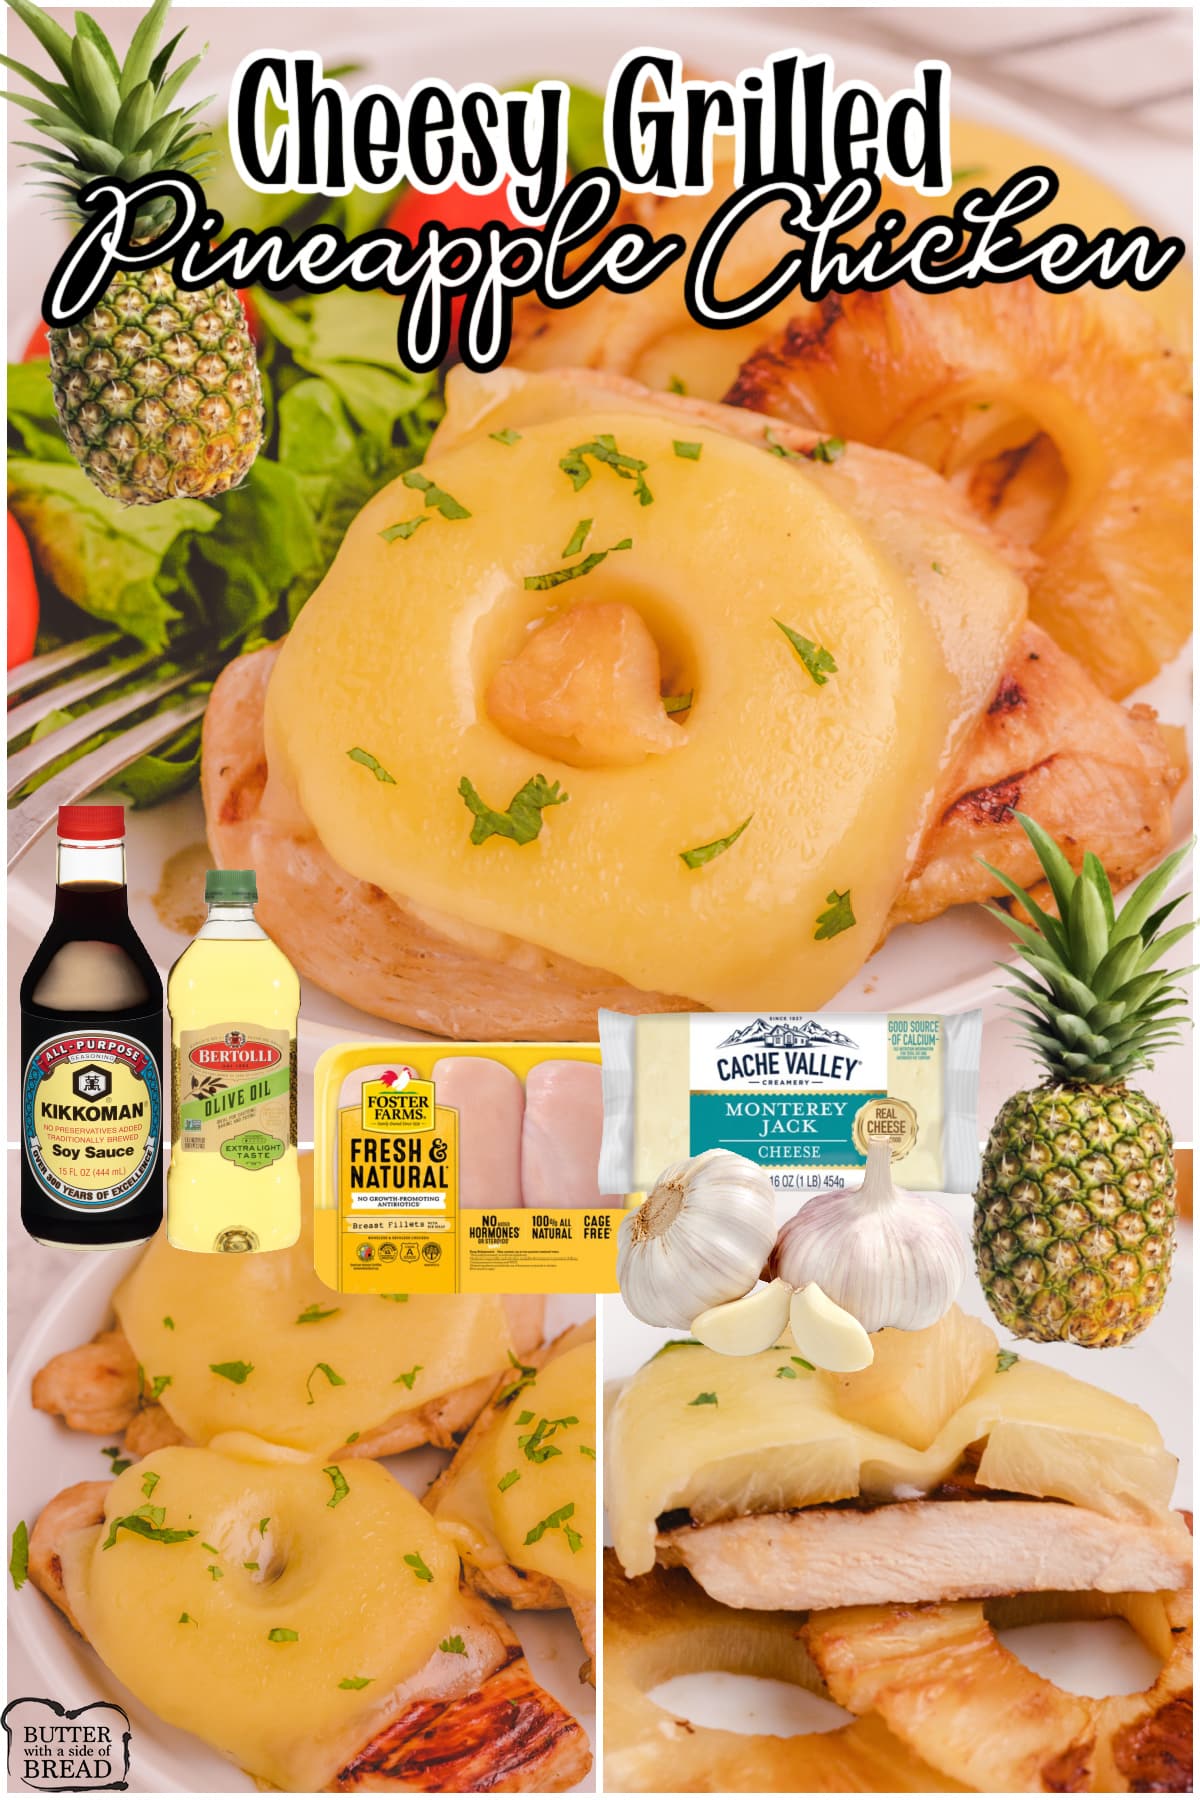 Cheesy Grilled Pineapple Chicken made with an easy marinade & topped with grilled pineapple and a slice of jack cheese. Tender, juicy grilled chicken recipe with fantastic flavor! 